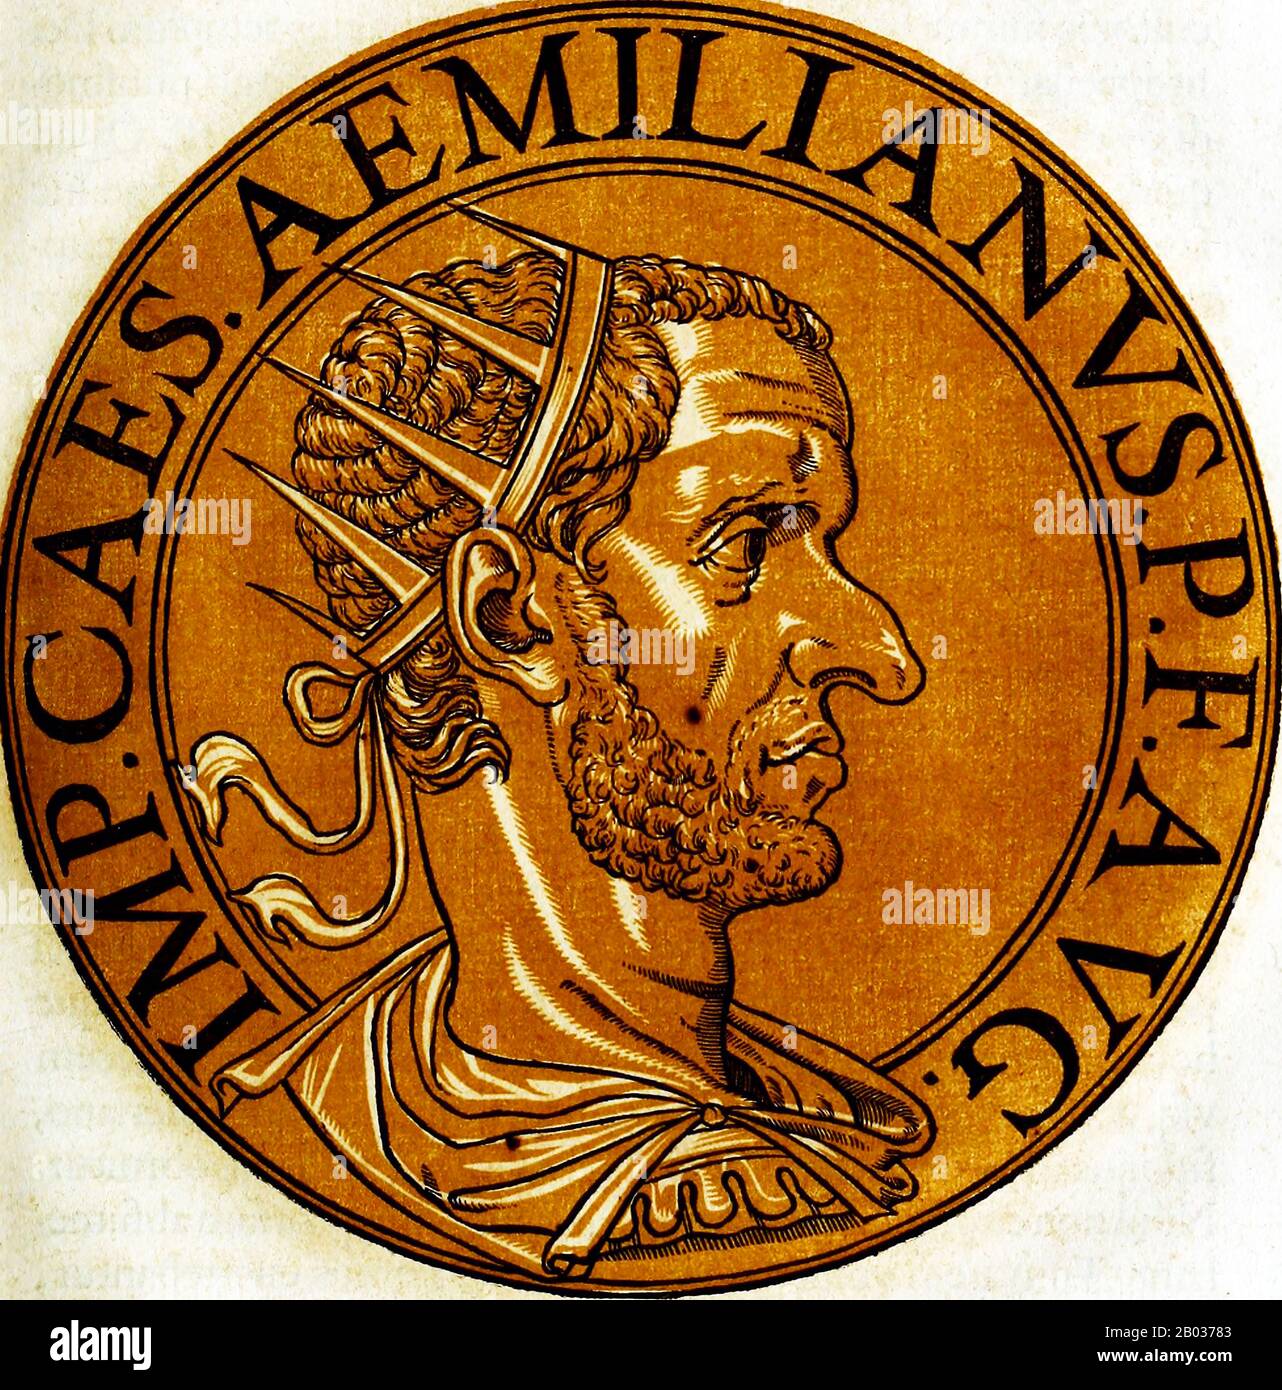 Aemilianus (207/213-253), also known as Aemilian, was commander and governor of the Roman provinces in the Balkans. During the reign of Trebonianus Gallus and his son Volusianus, Aemilian fought a resurgent Goth invasion in the Balkans, and was proclaimed Emperor by his own soldiers for his victories. He immediately marched towards Rome to usurp Gallus and Volusianus, defeating them in battle and ascending to the imperial throne  However, less than three months into his reign, a rival claimant to the throne, Valerian, marched towards Rome. Aemilian's soldiers, not wishing to fight a civil war Stock Photo